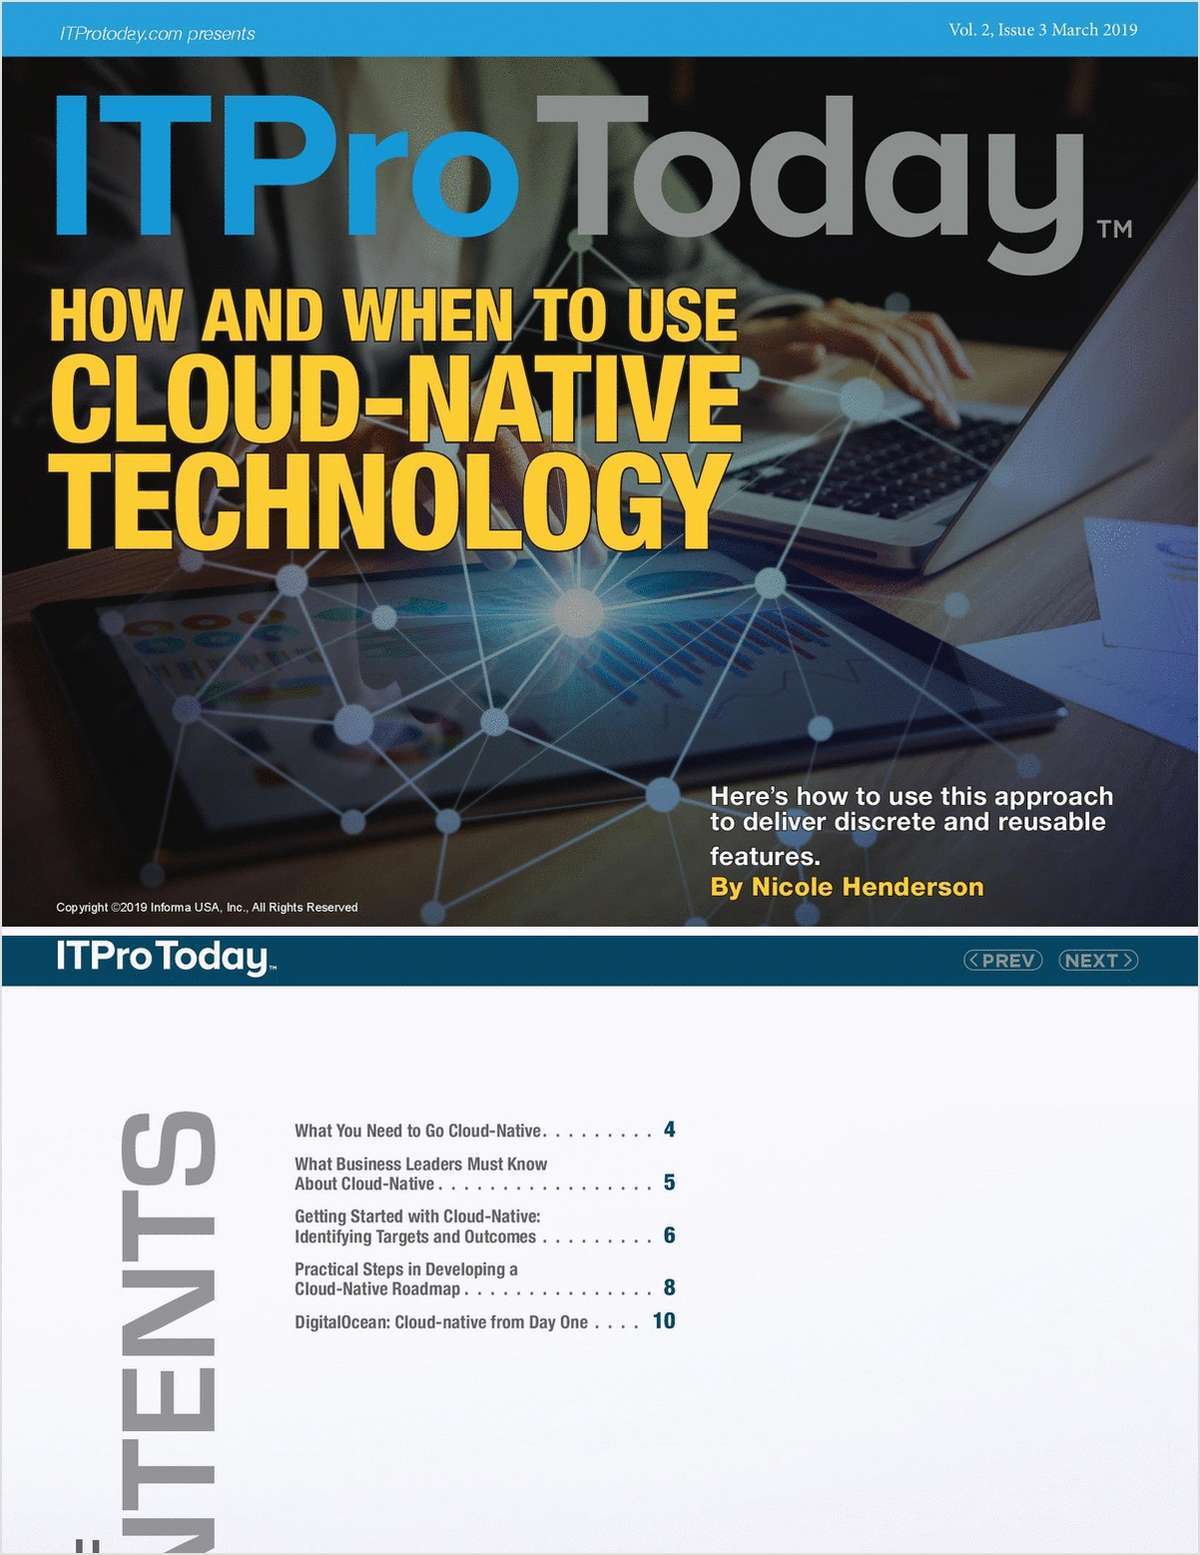 How and When to Use Cloud-Native Technology